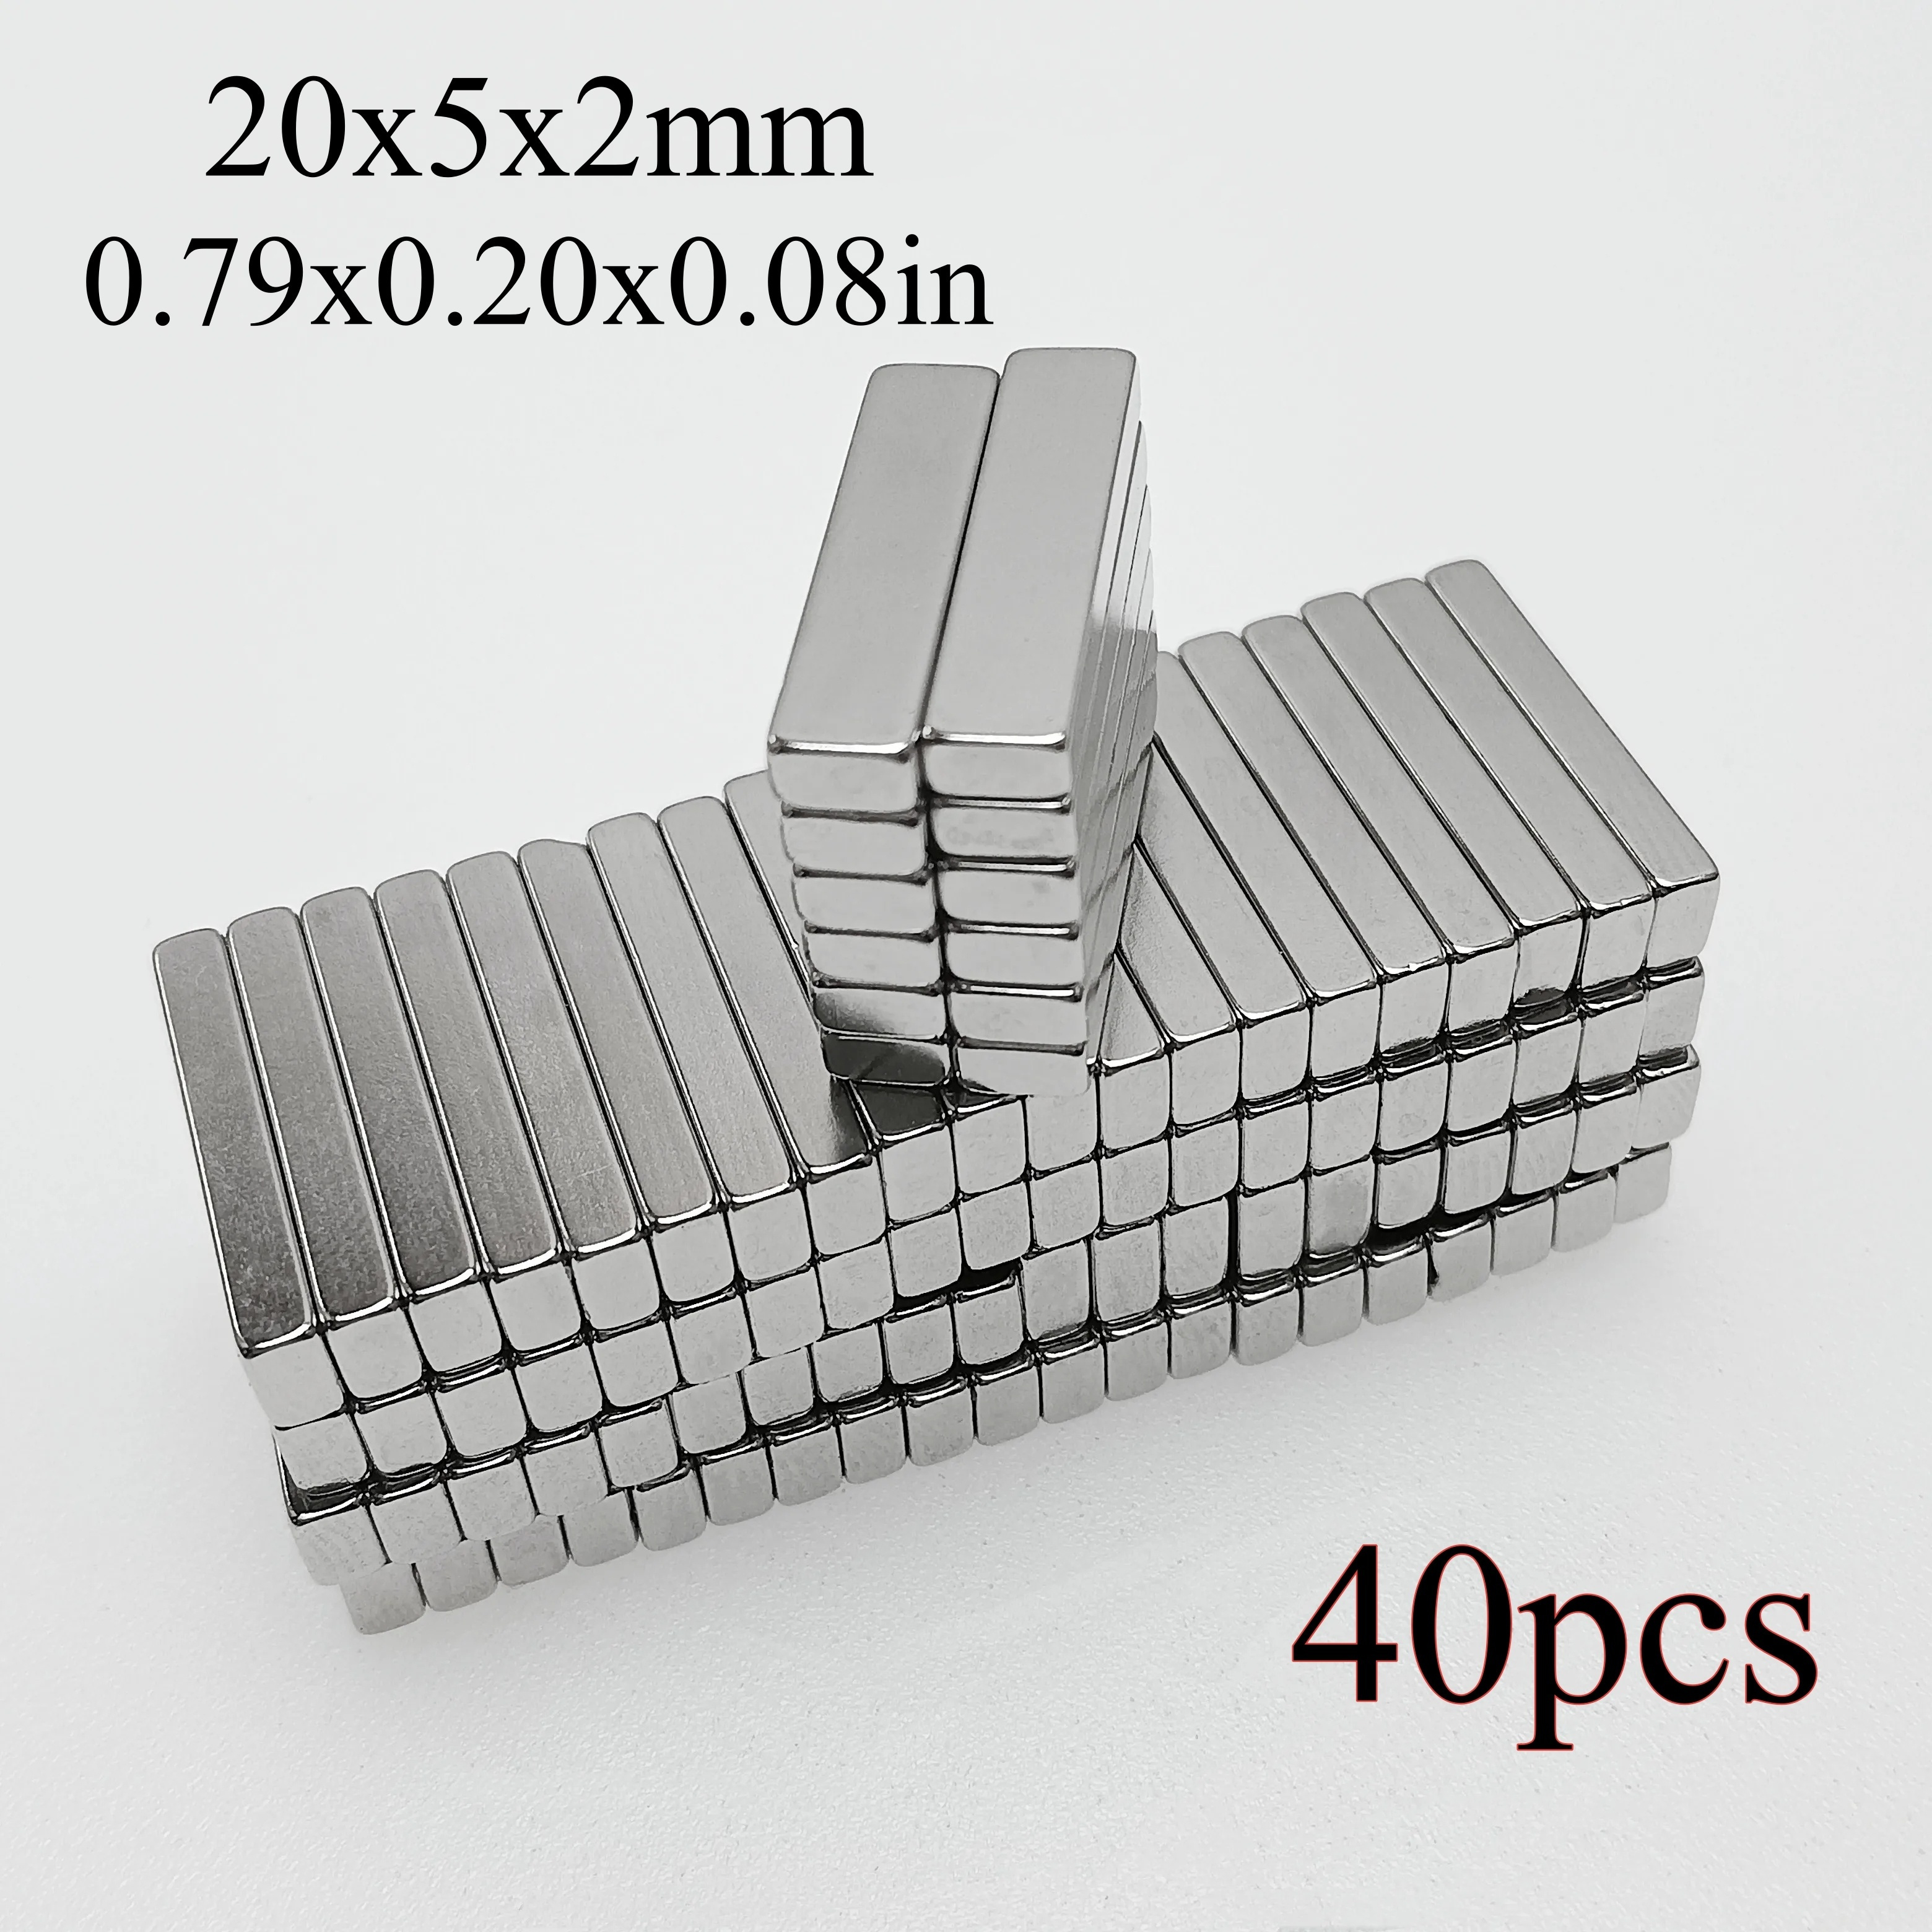 

durable" 20-piece Super Strong Neodymium Square Magnets, 20x5x2mm - N35 Rare Earth Magnets For Tools & Crafts